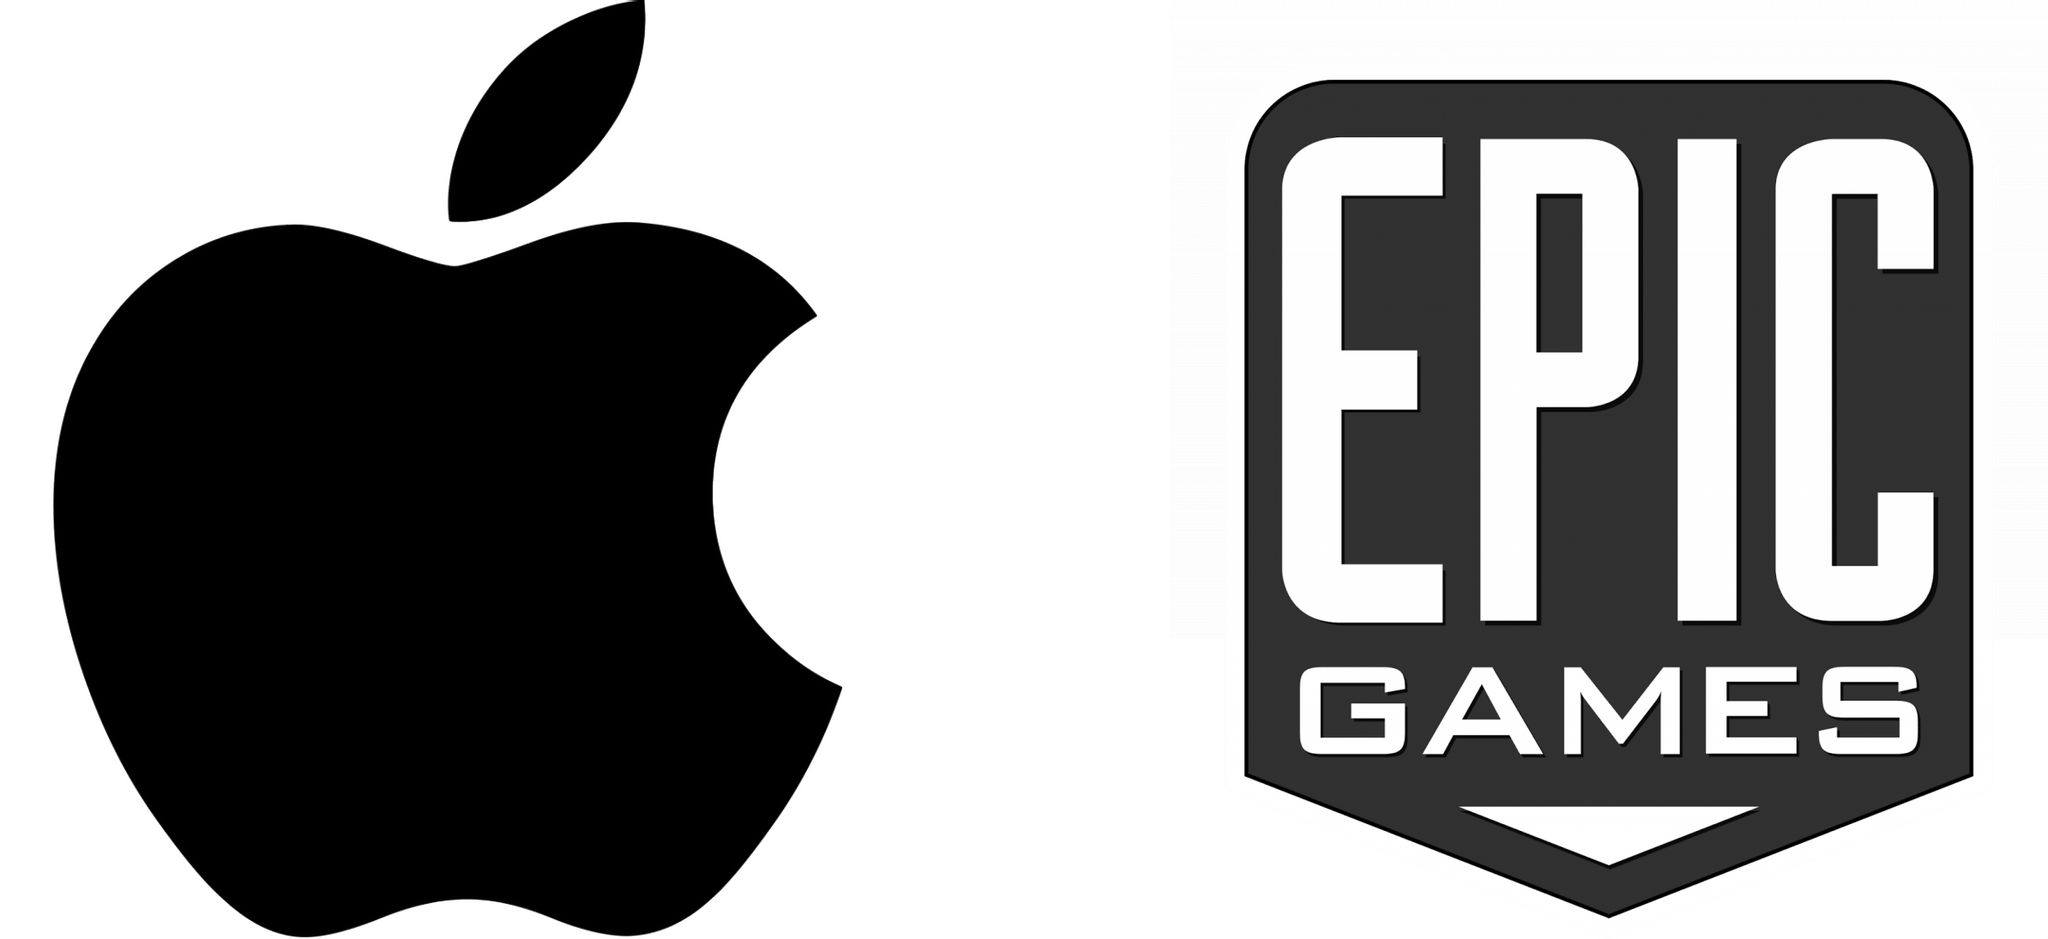 epic-games-takes-apple-battle-to-the-supreme-court-whats-at-stake